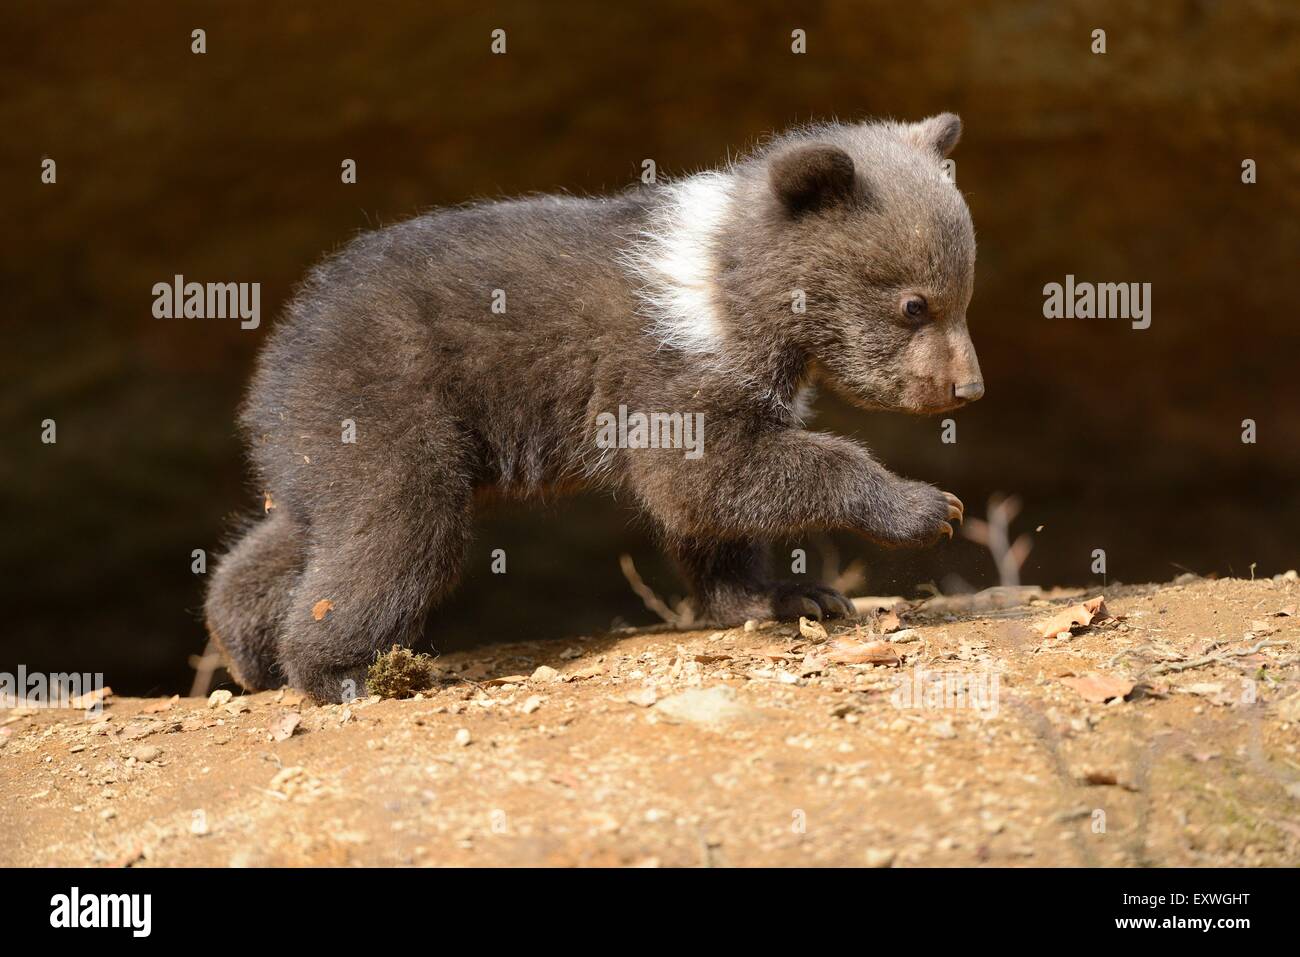 Brown bear cub (Ursus arctos) in Bavarian Forest National Park, Germany Stock Photo